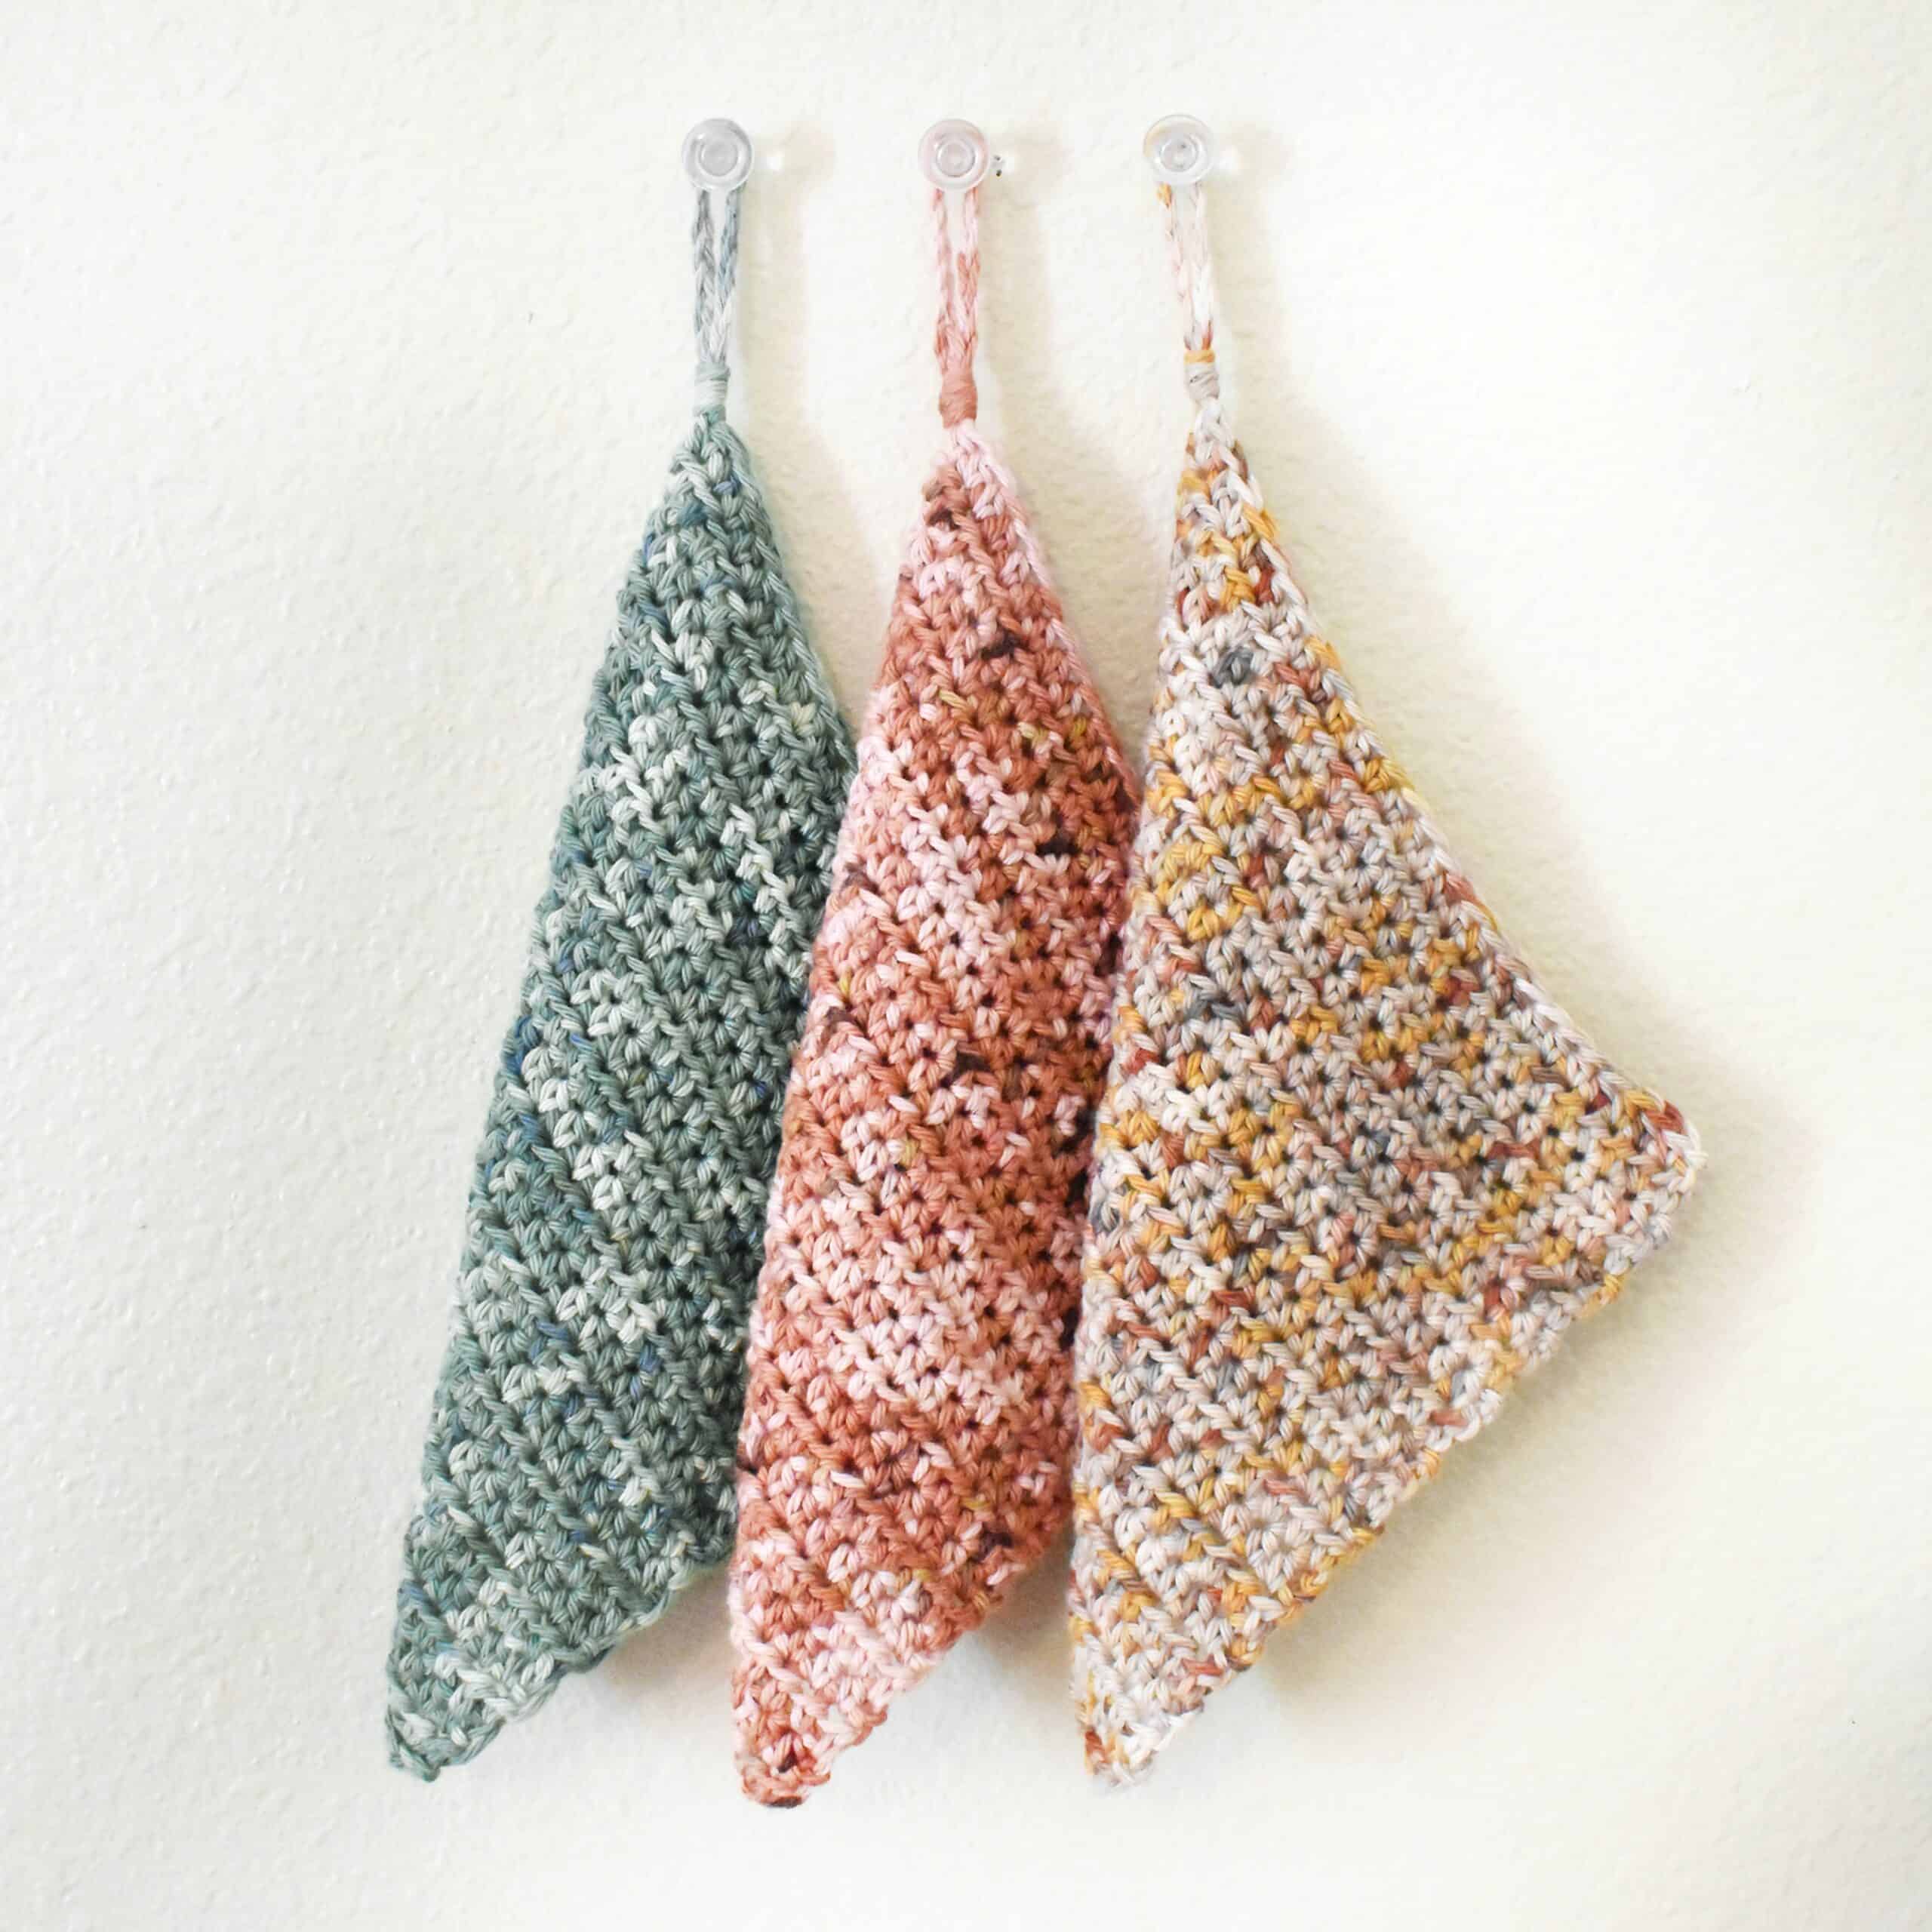 three pieces of crochet potholders hanging from hooks